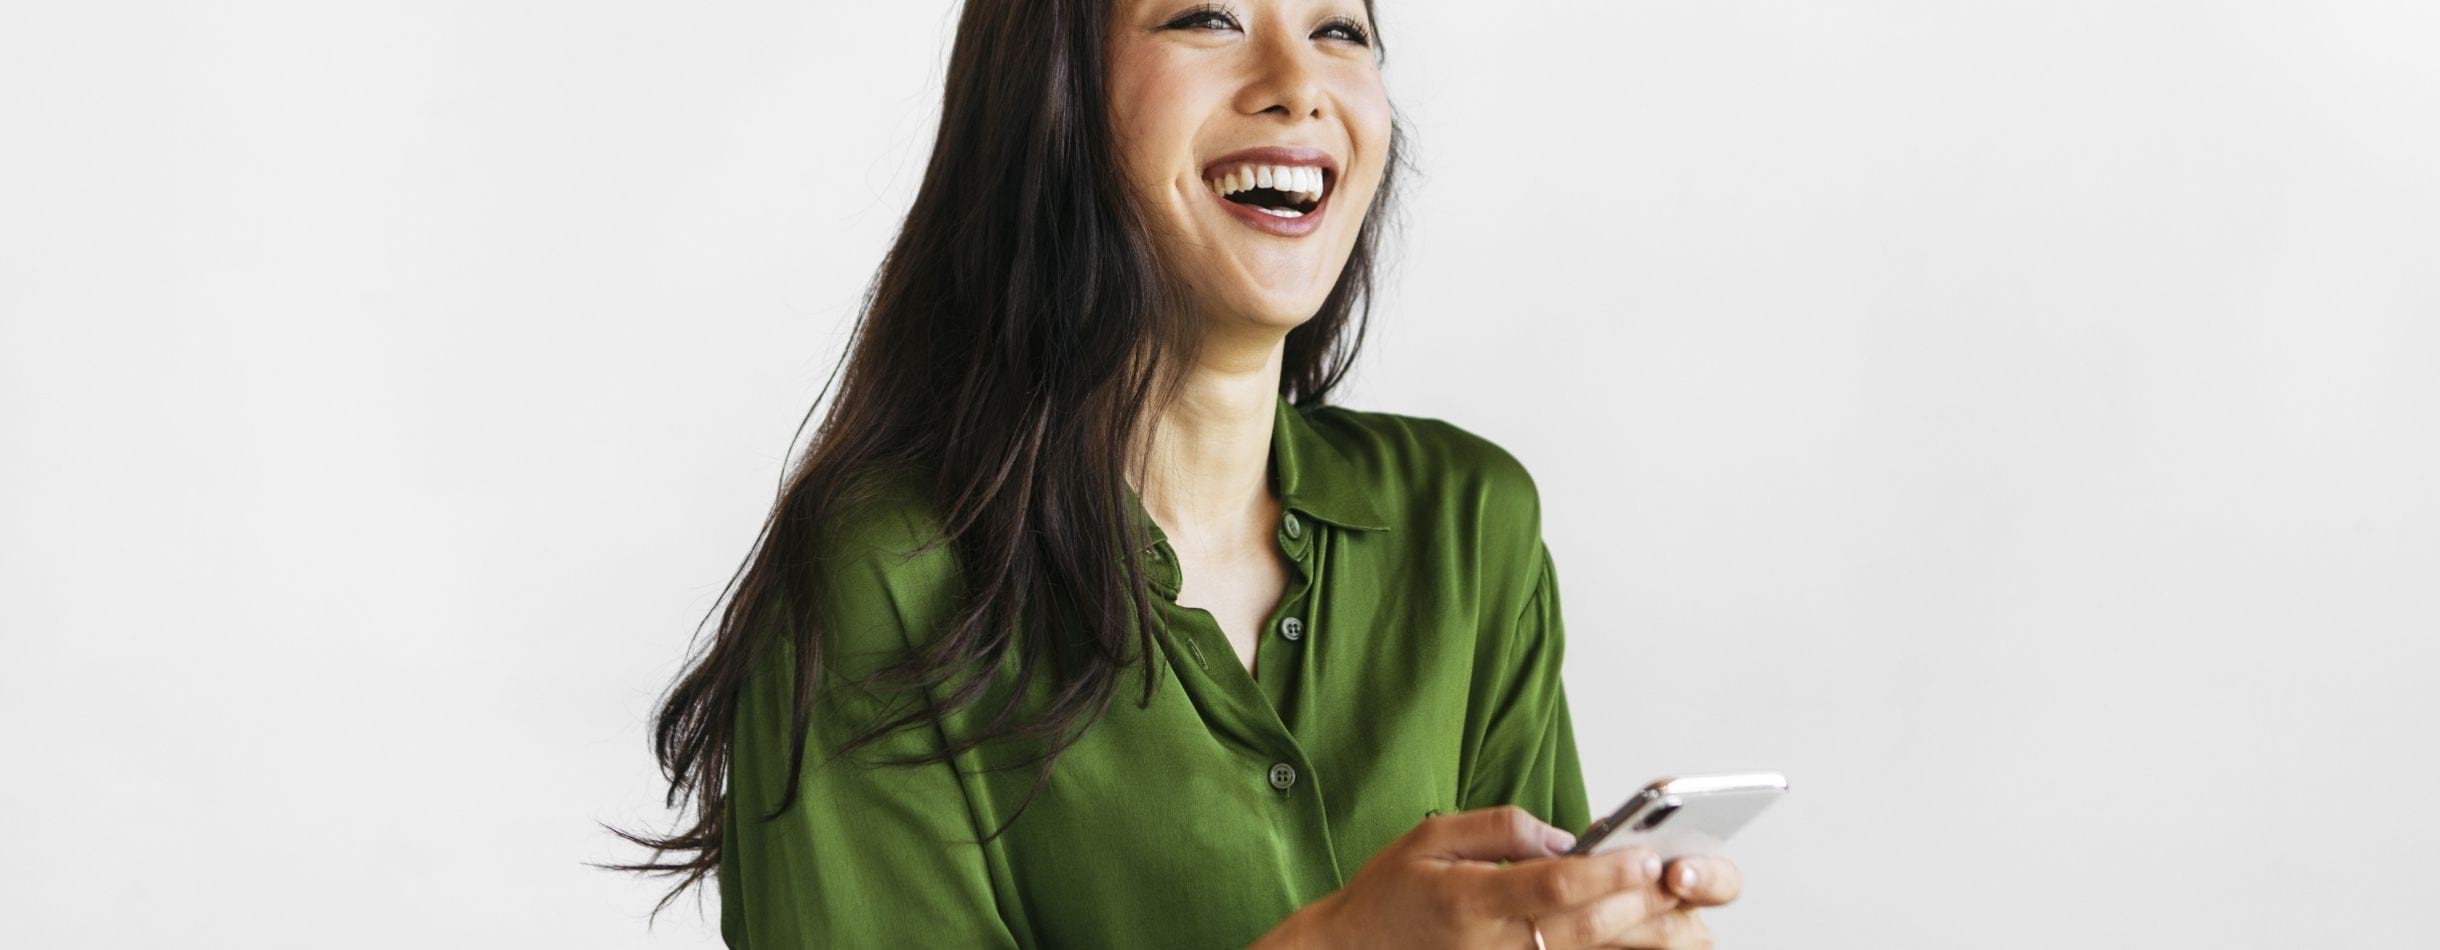 Woman holding her phone and smiling